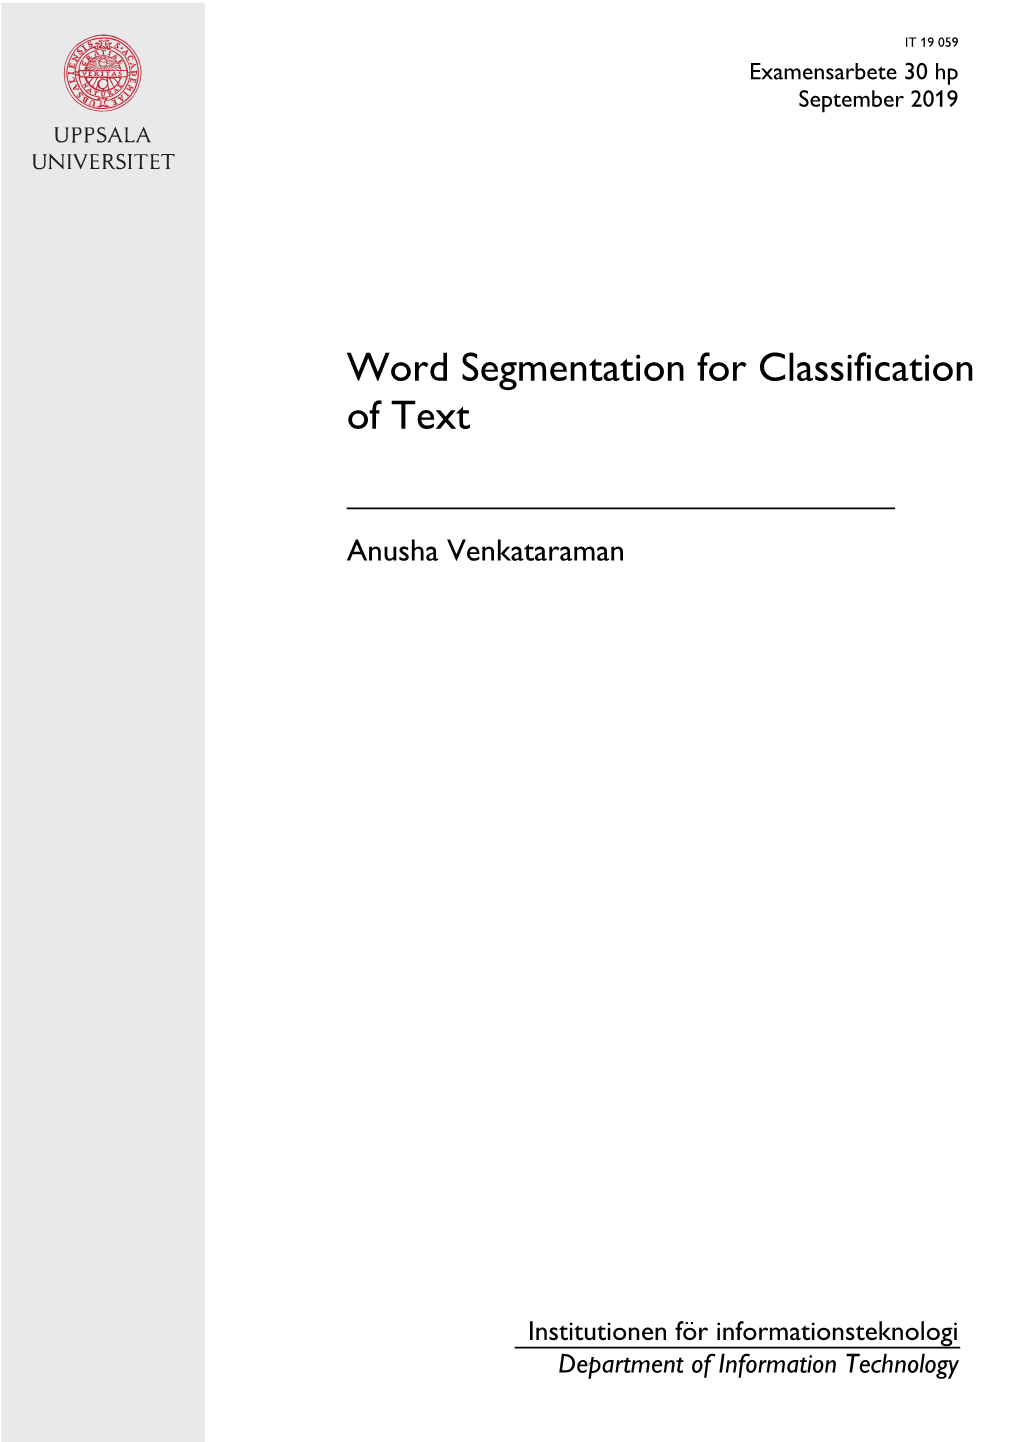 Word Segmentation for Classification of Text